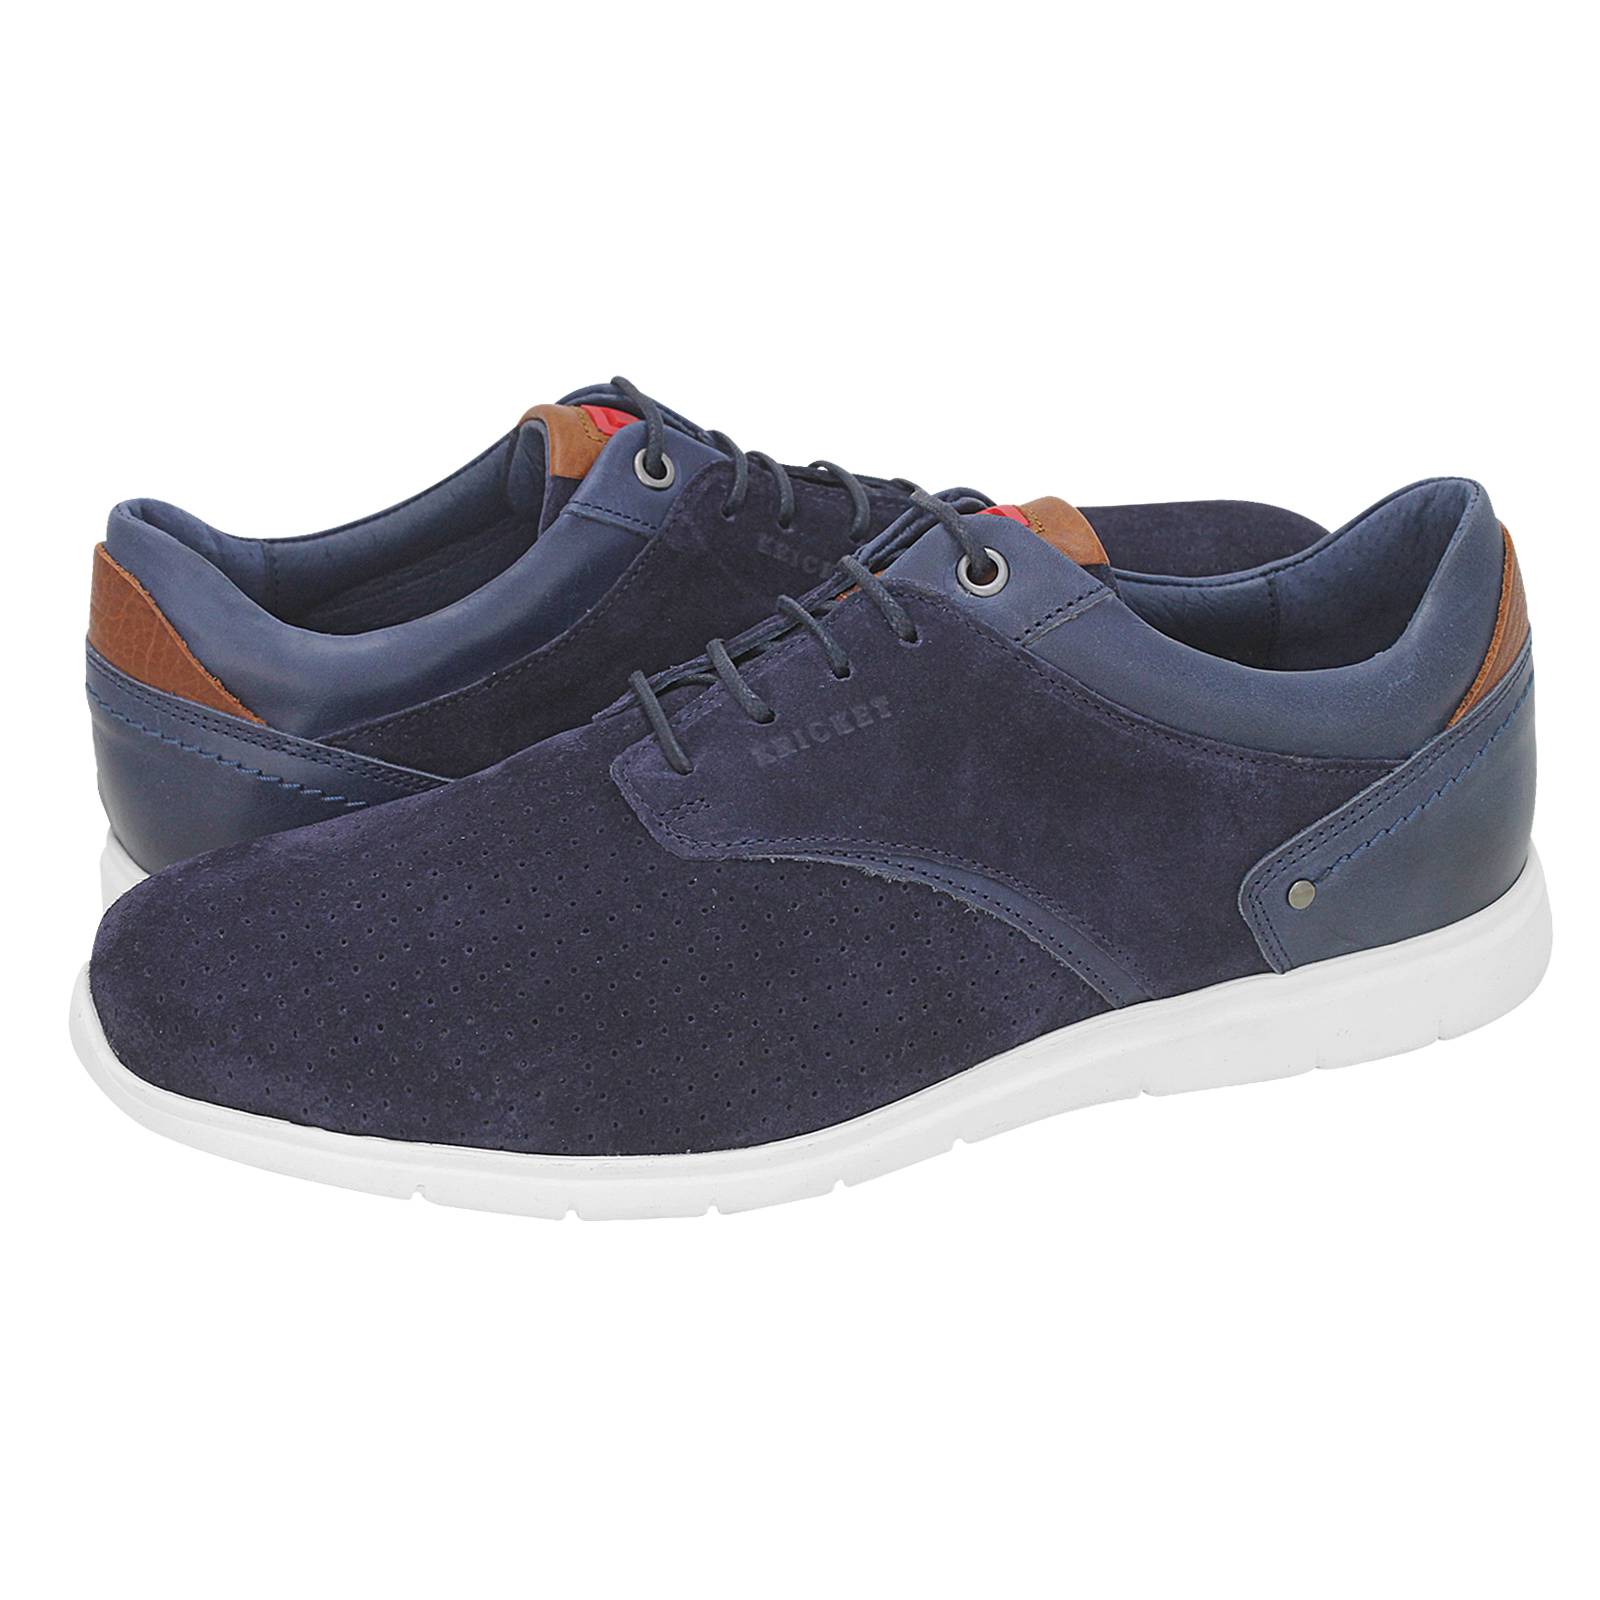 Cornedo - Kricket Men's casual shoes made of perforated suede, suede ...